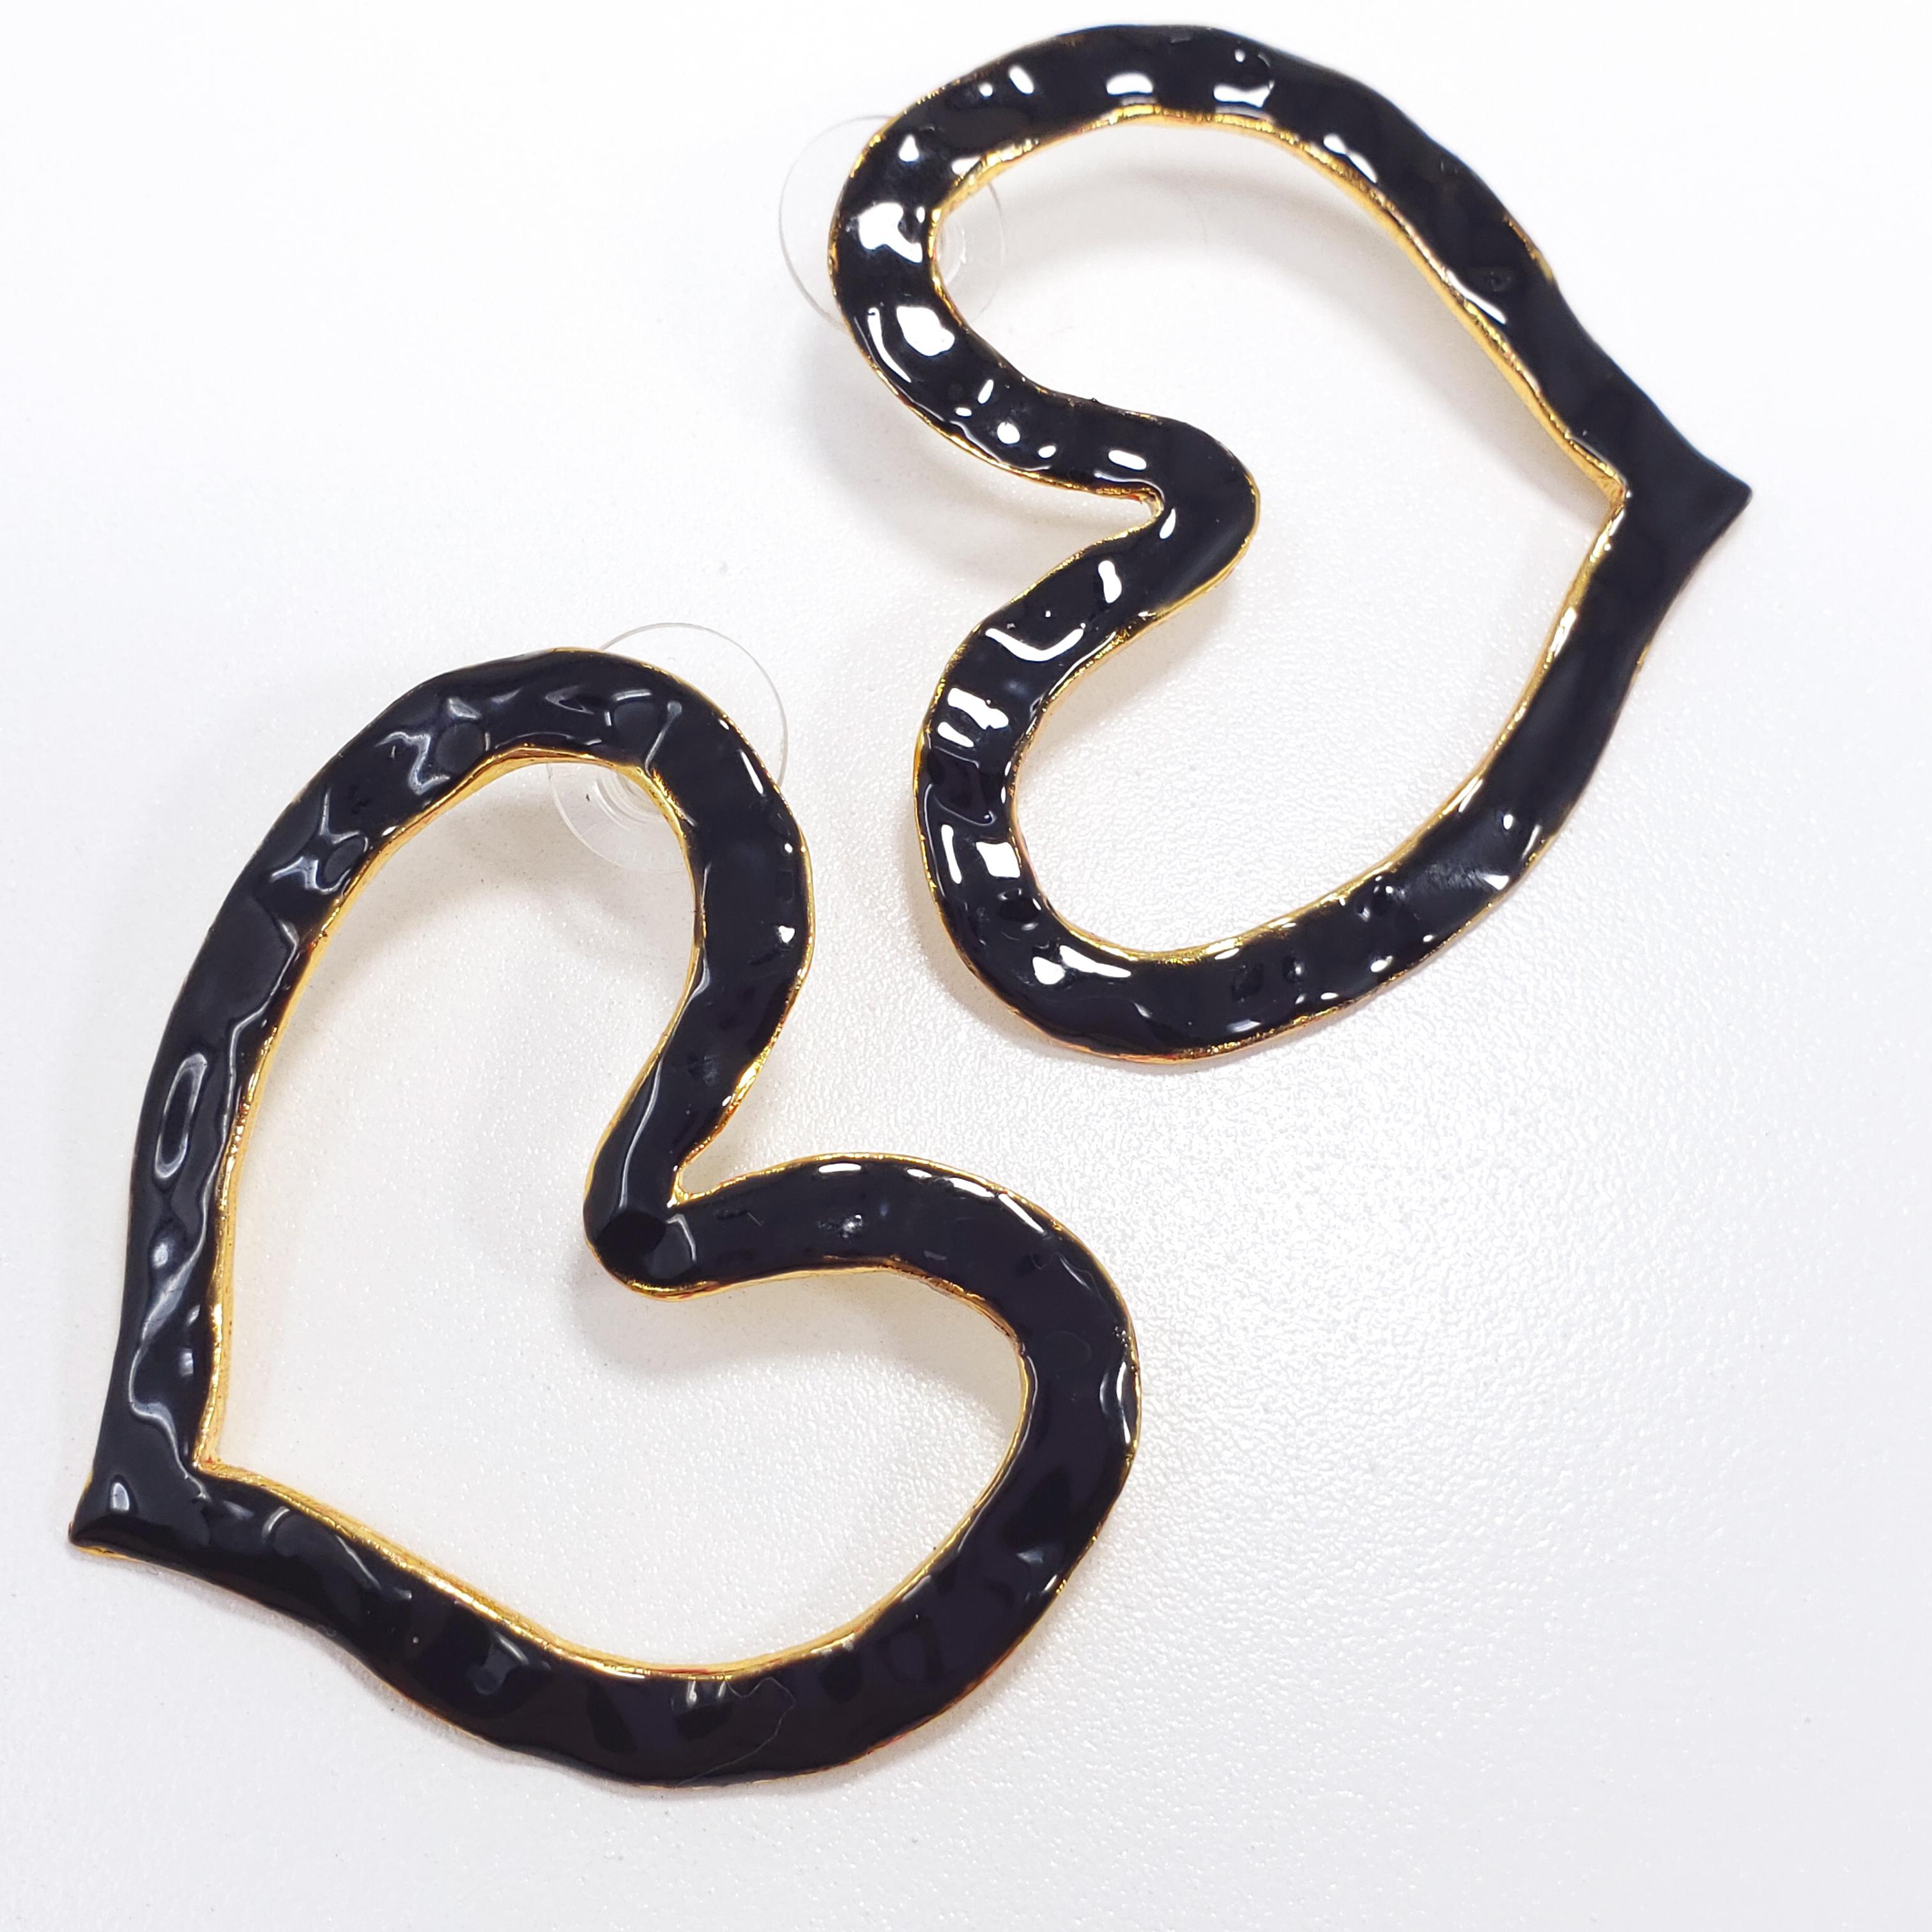 Each earring features a textured gold-plated heart motif painted with black enamel. Post backs. Heart earrings with an Oscar de la Renta twist.

Hallmarks: Oscar de la Renta, Made in USA
Dimensions: L 4.6 x W 4.6 cm at widest parts
Weight: 17 g